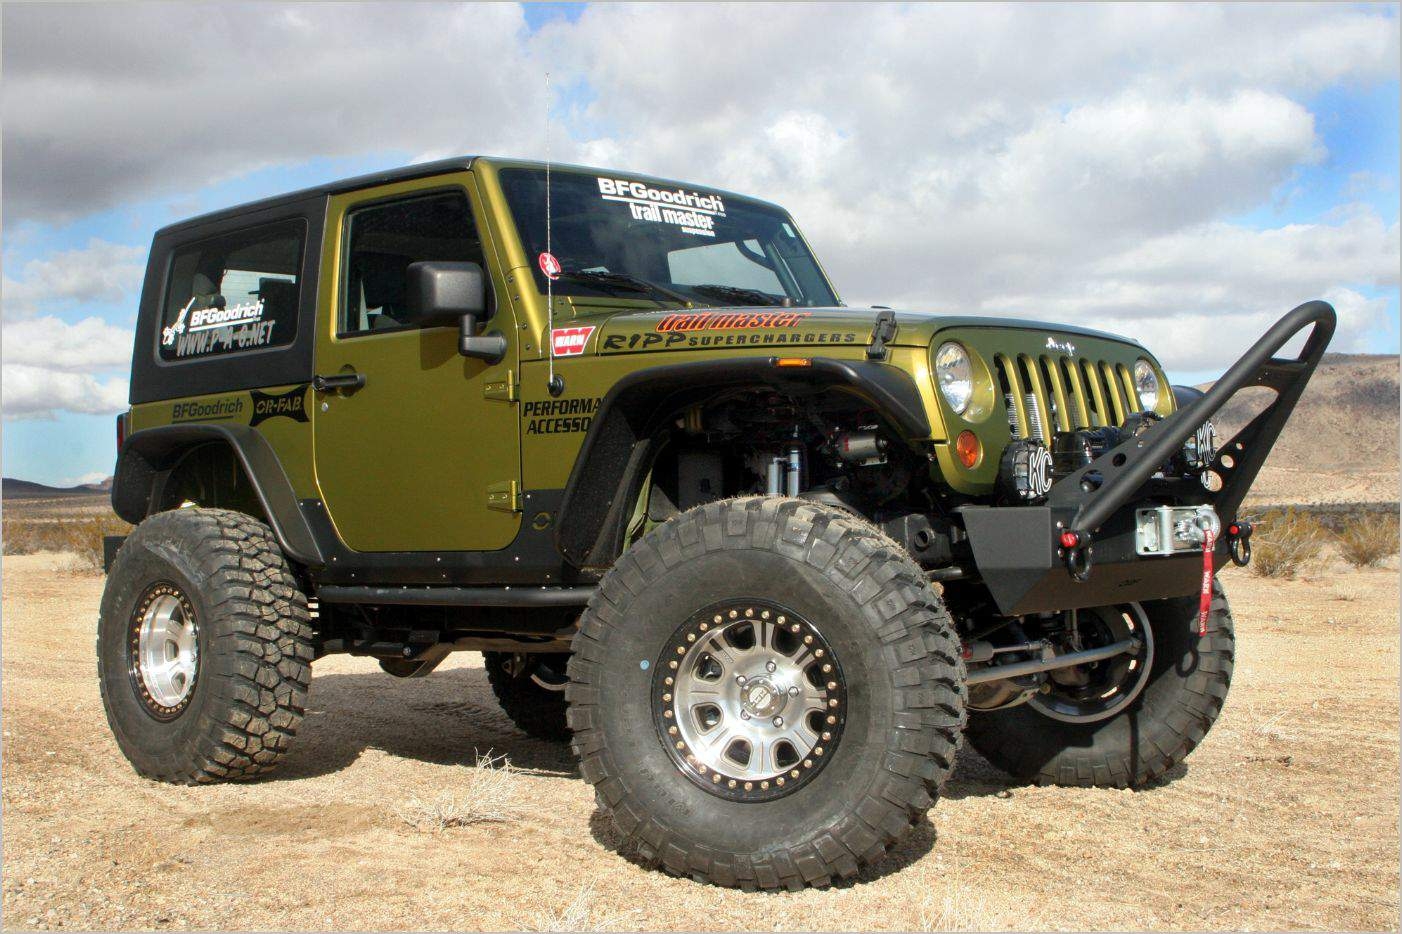 OR-FAB parts for jeeps on sale